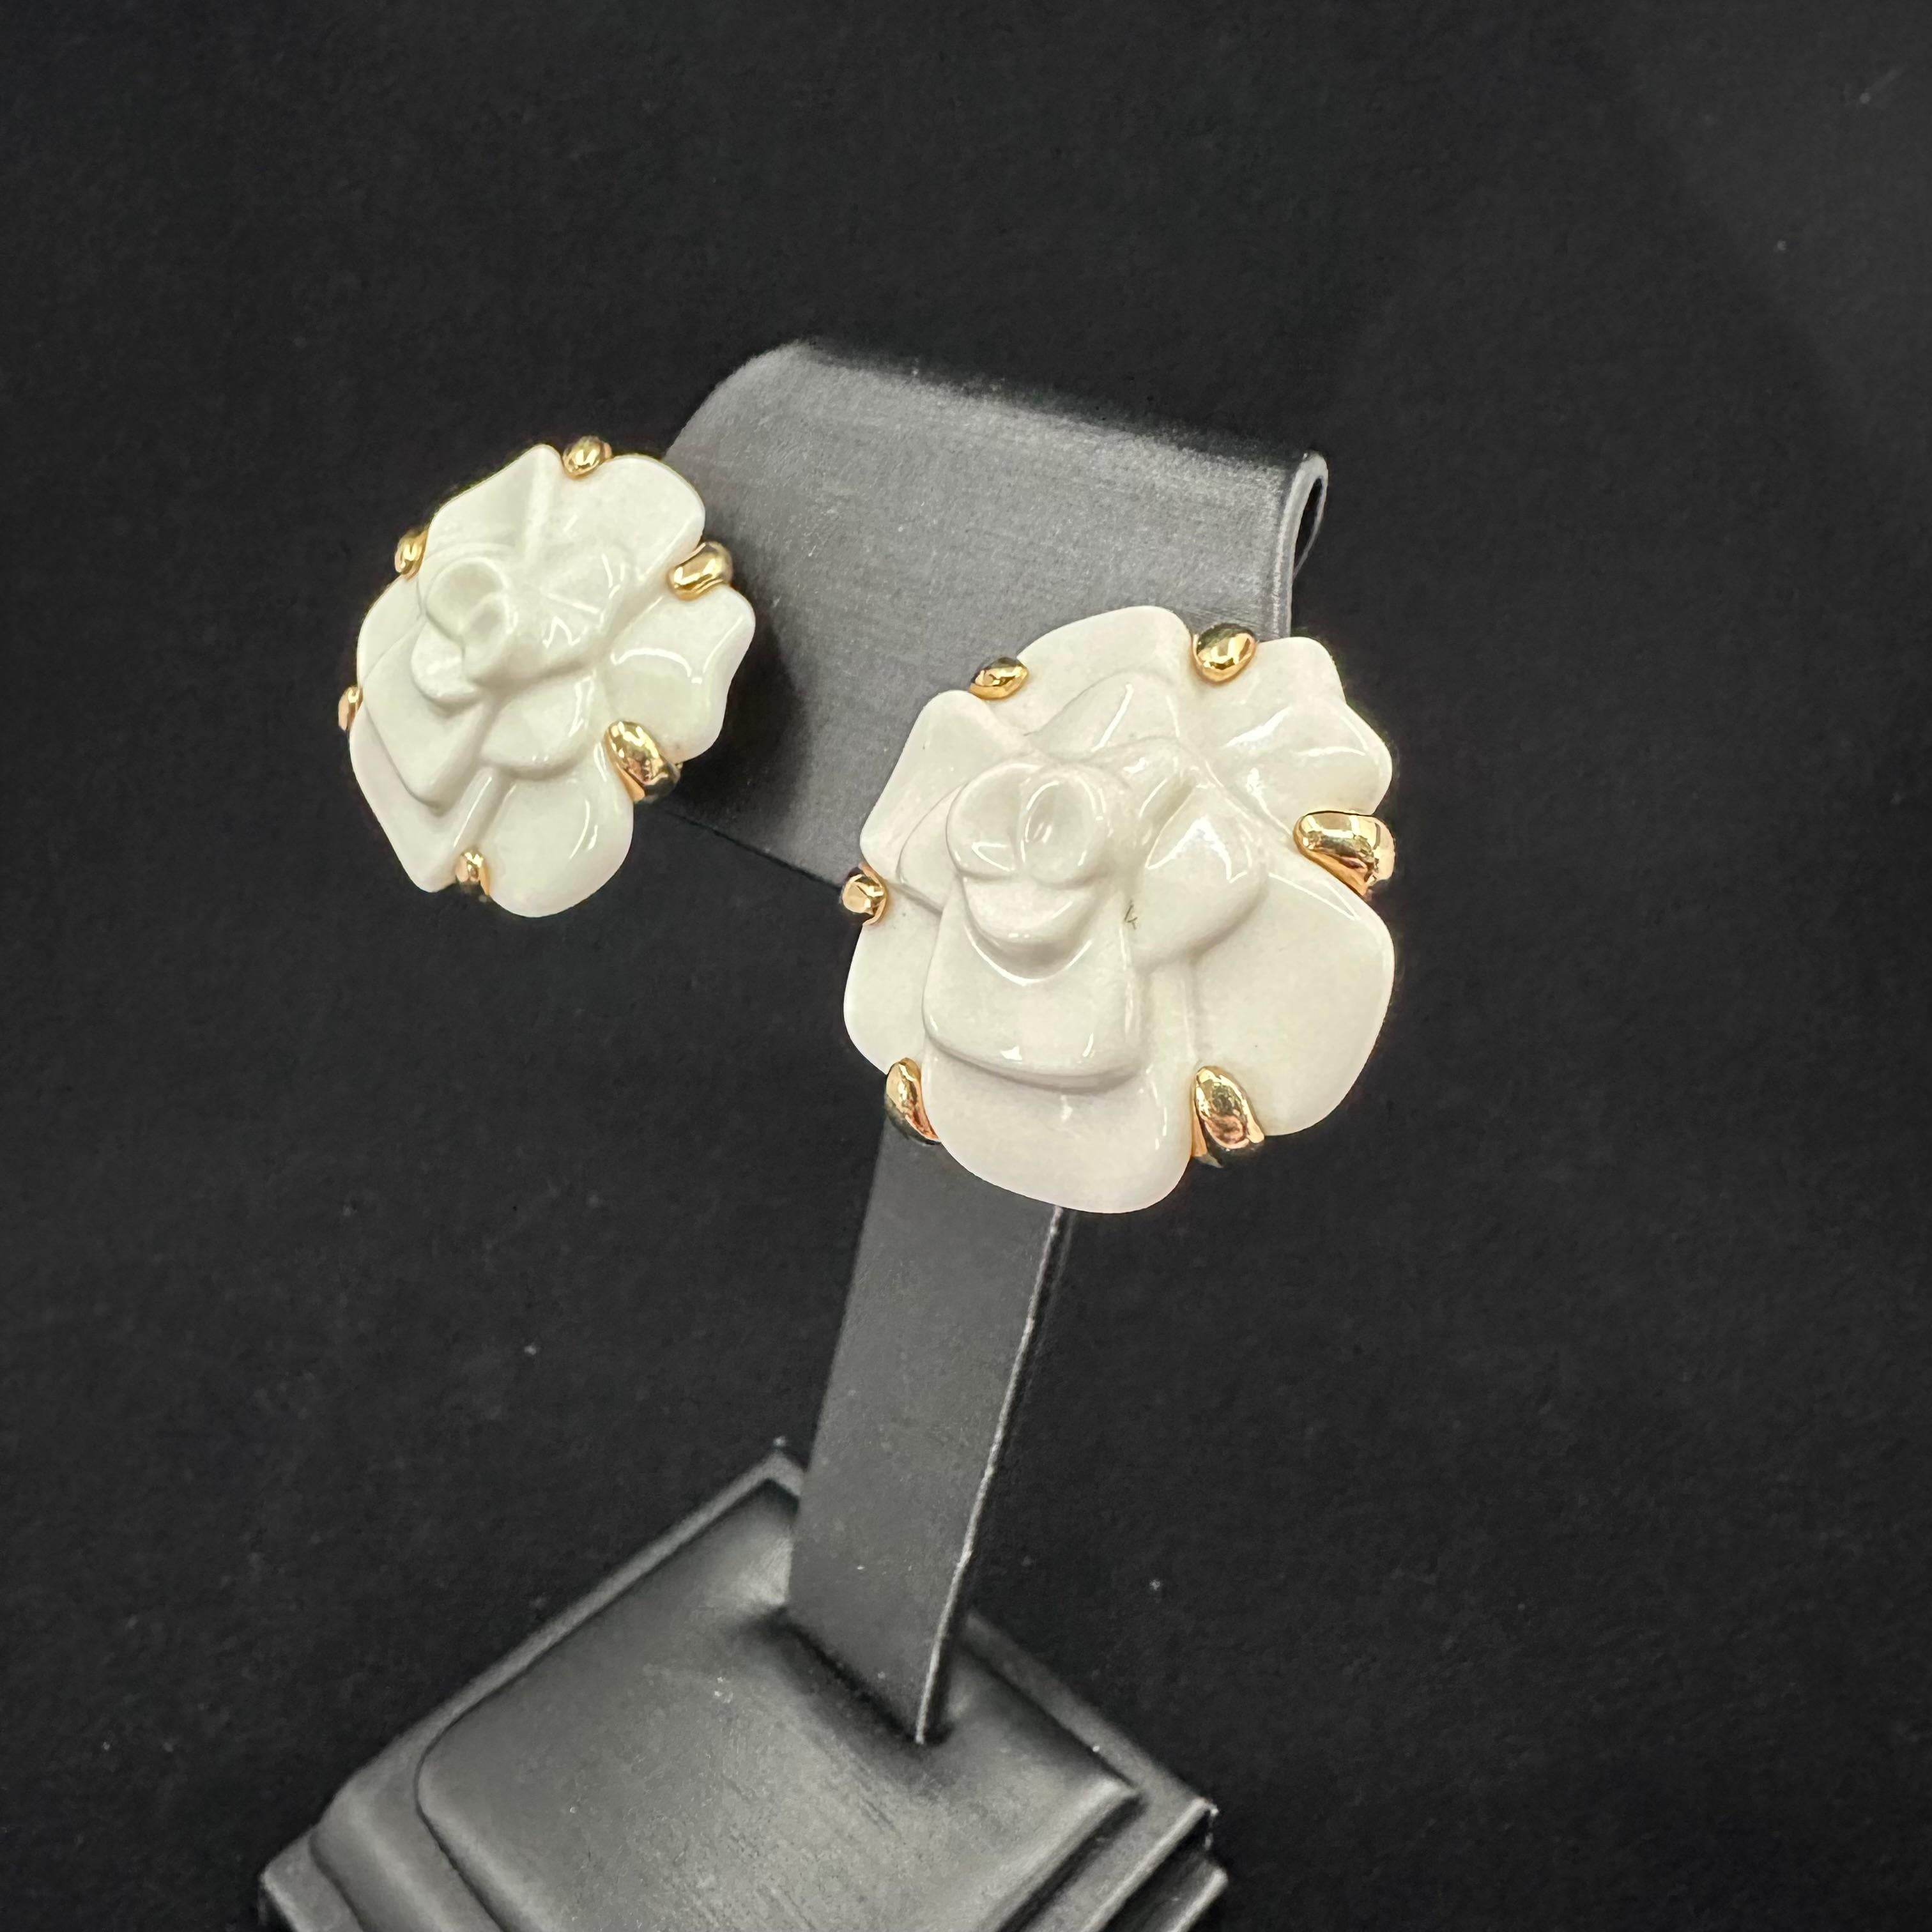 Chanel Camellia Large White Agate 18k Earrings.
Diameter: 1.25 Inches
18k Yellow Gold with Post and lever Backs
This Variation of the Chanel Camellia Earring is no Longer Produced  Hallmarks Chanel with French Eagles head and numbers.

Coco Chanel